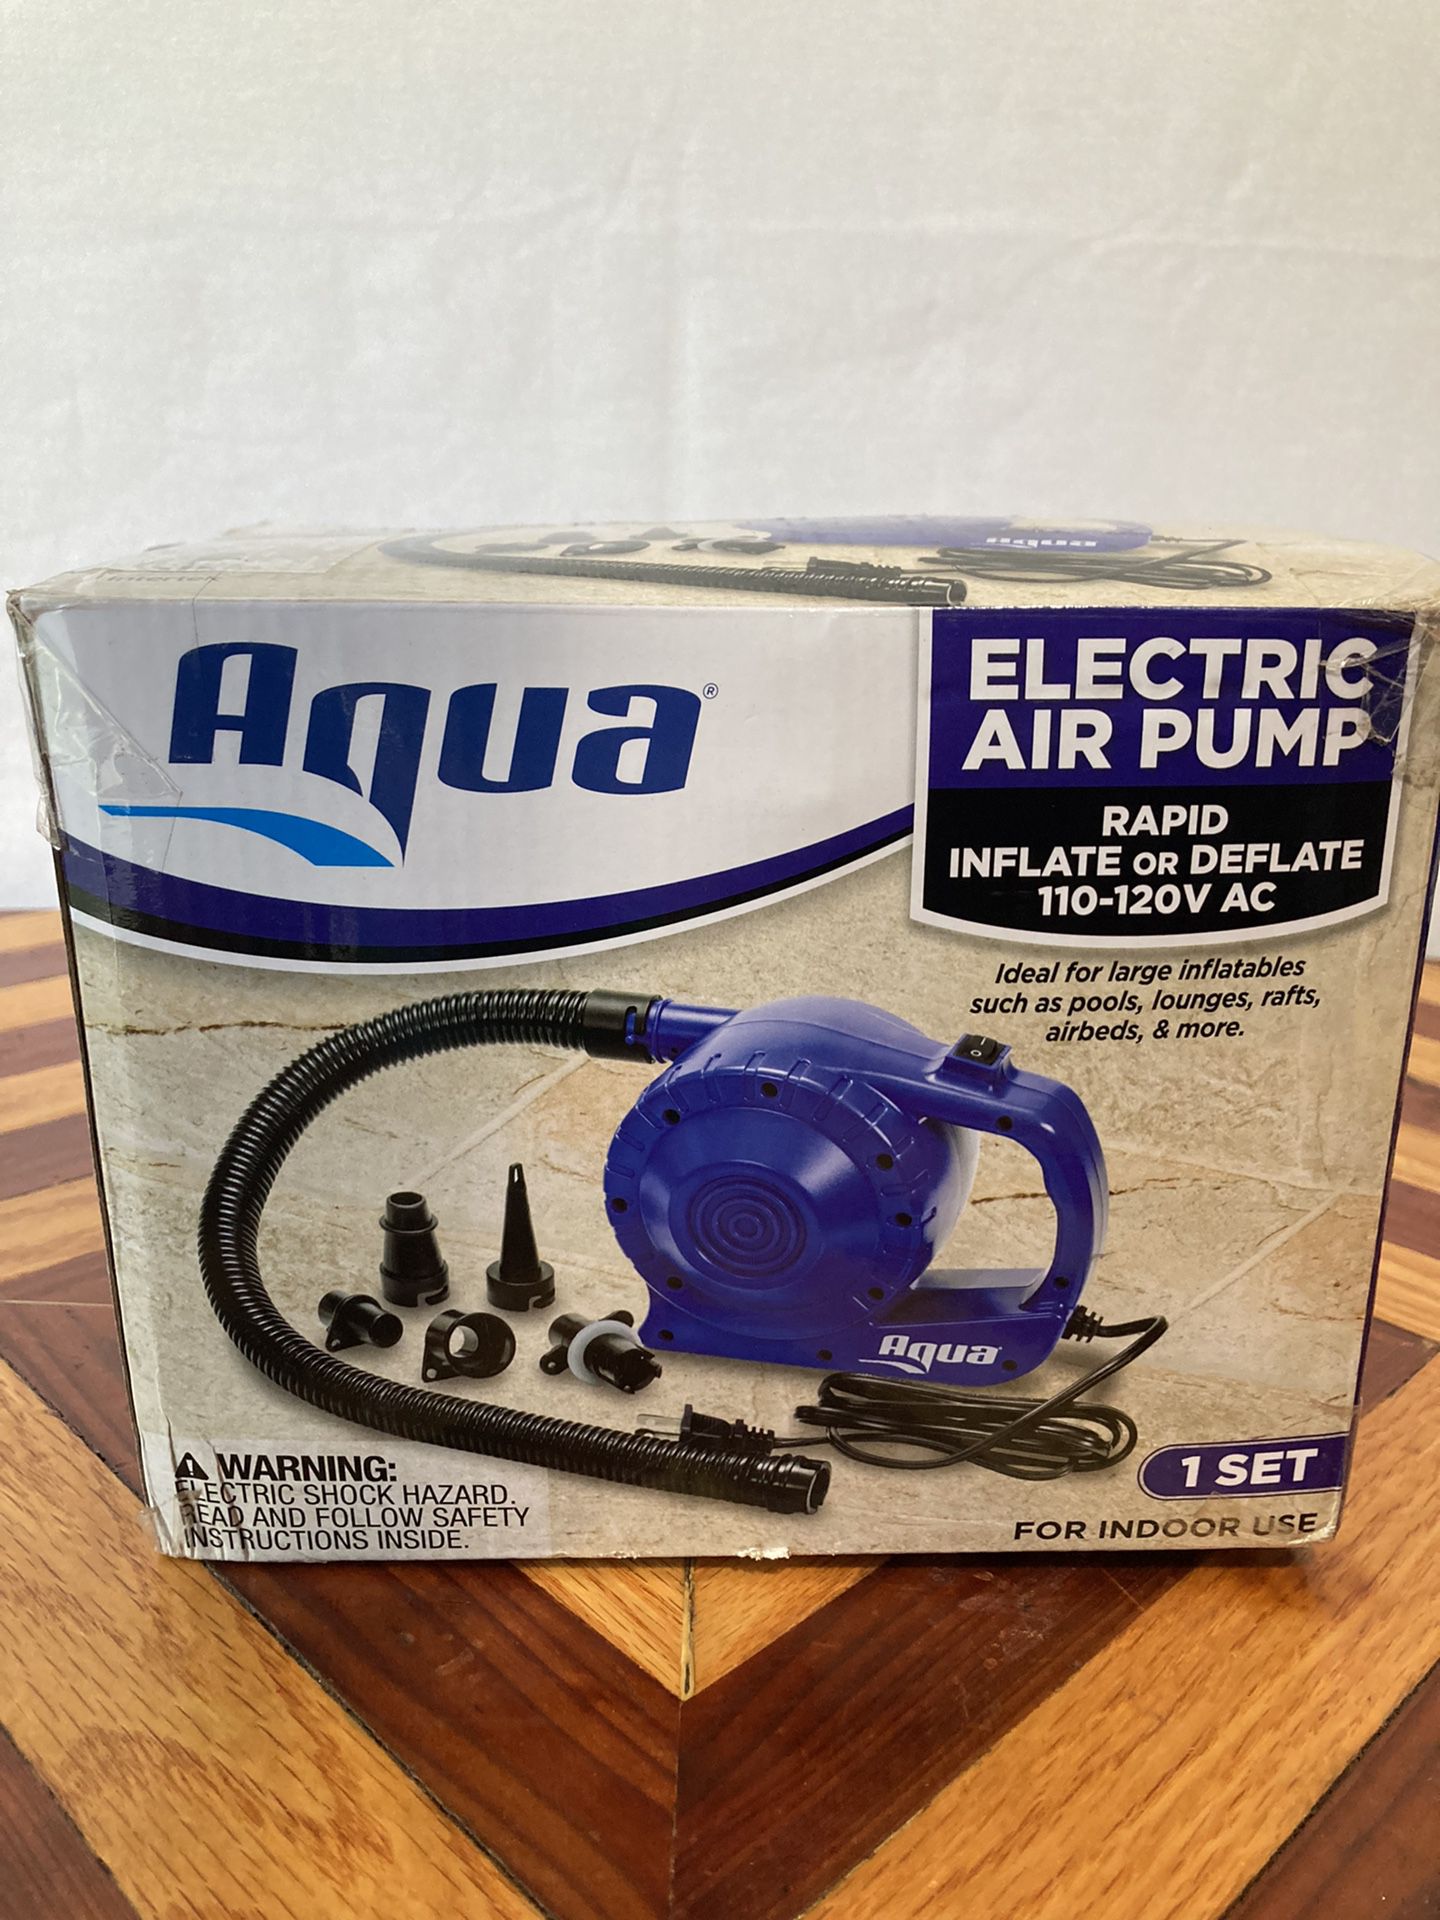 Aqua AC Air Pump Heavy Duty Rapid Inflate/Deflate With 5 Nozzle Attachments Blue